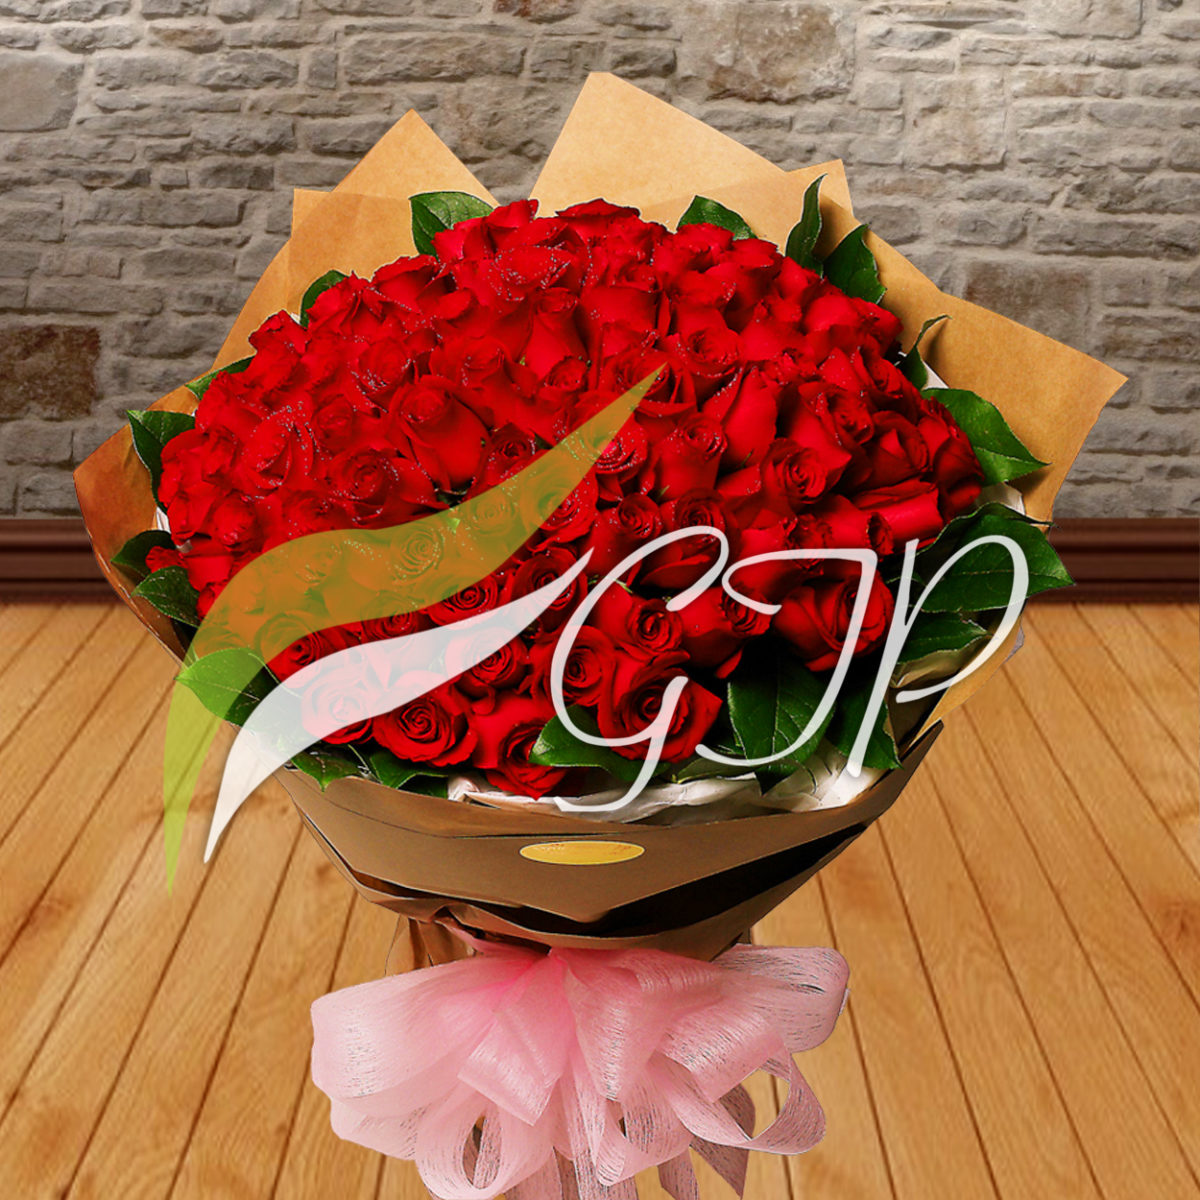 A bouquet of 100 vibrant red roses arranged in an elegant and graceful manner.